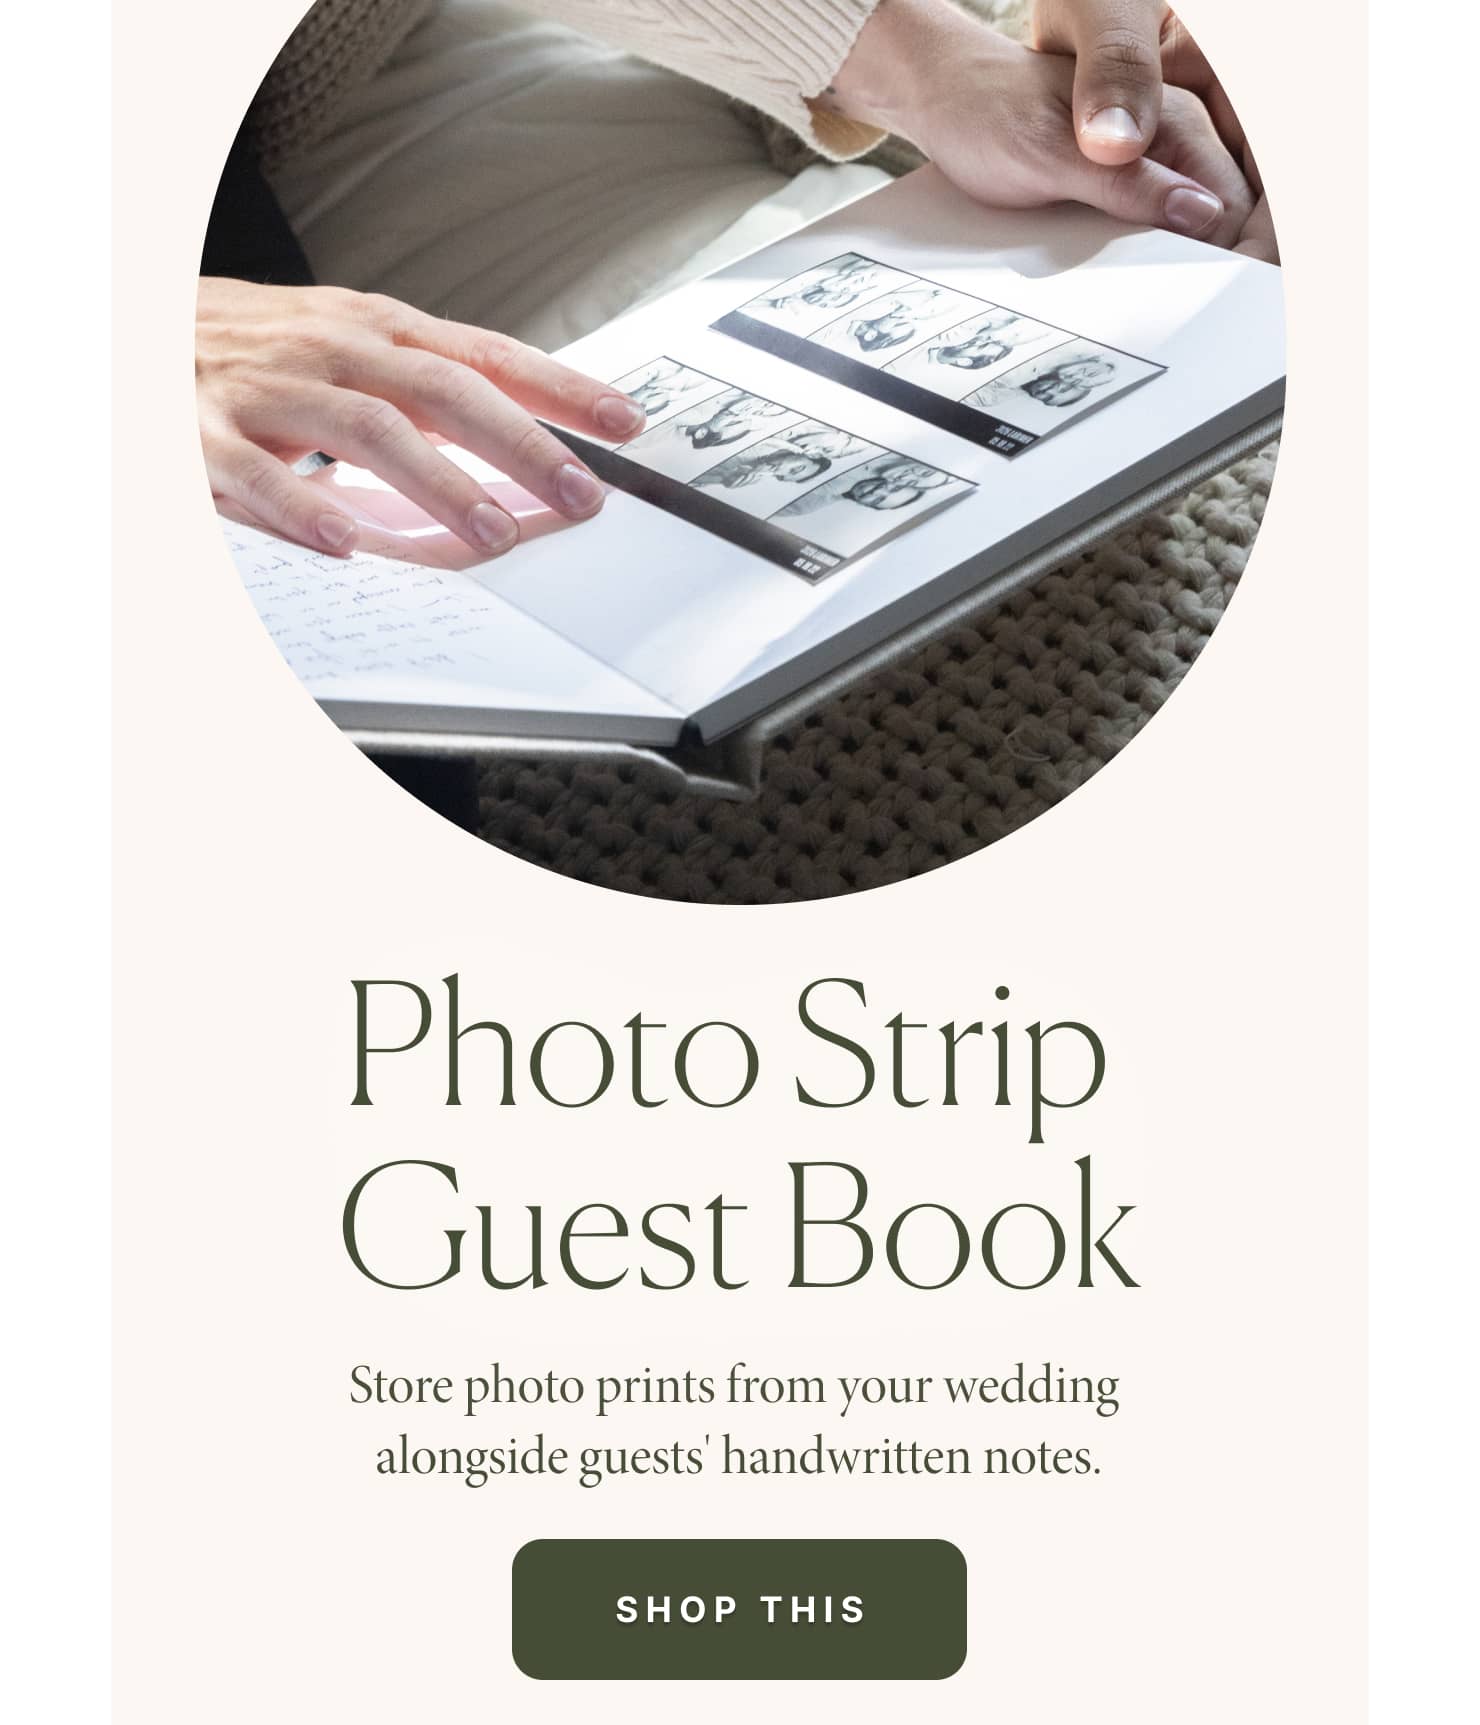 Photo Strip Guest Book | Store photo prints from your wedding alongside guests' handwritten notes. | Shop this  Photo Strip Guest Book Store photo prints from your wedding alongside guests' handwritten notes. SHOP THIS 